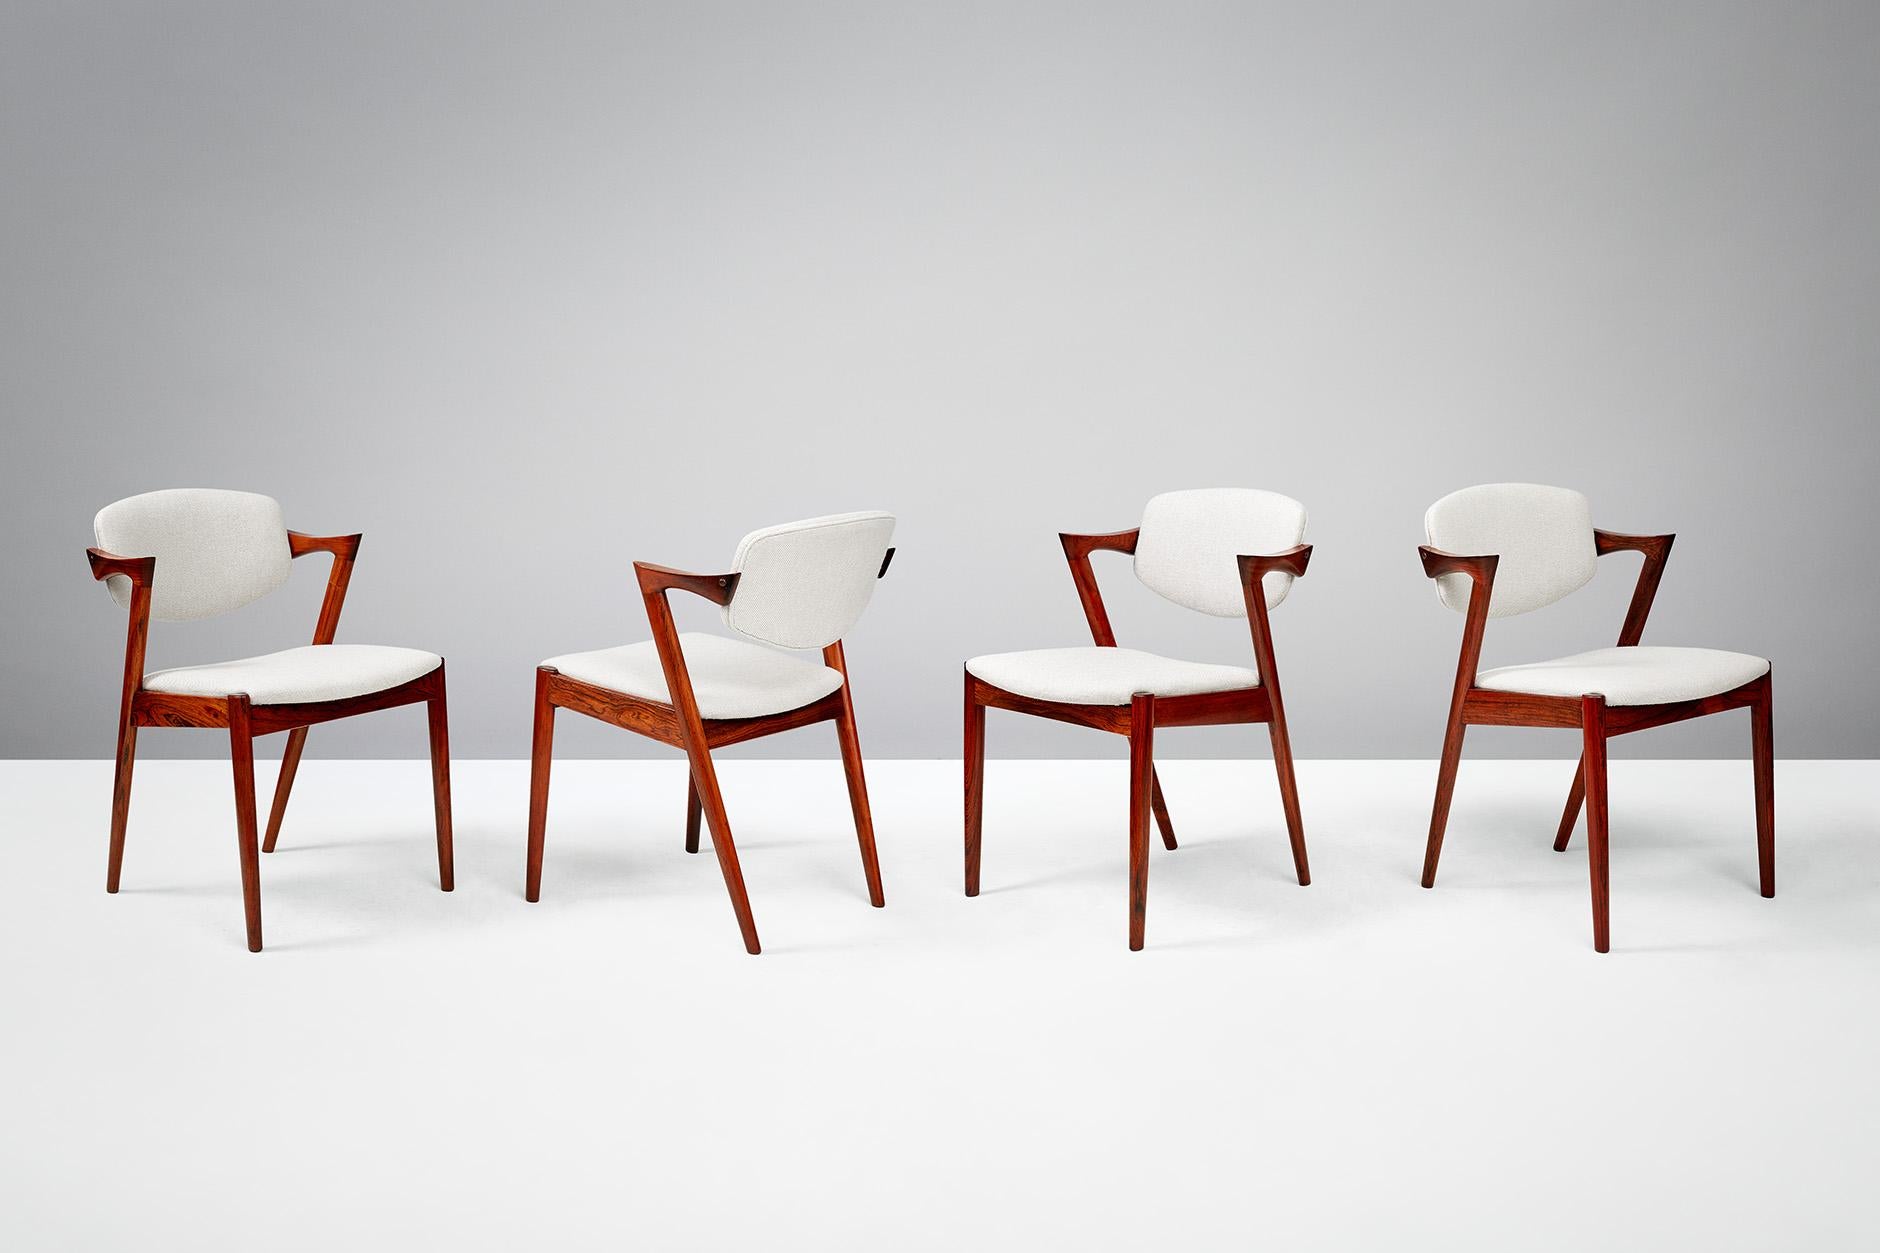 Kai Kristiansen
Model 42 dining chairs, 1956.

Set of 8 dining chairs produced by Skovman Andersen for the Illum Bolighus department store in Copenhagen. Refinished rosewood frames with seat and back reupholstered with Kvadrat Hallingdal wool